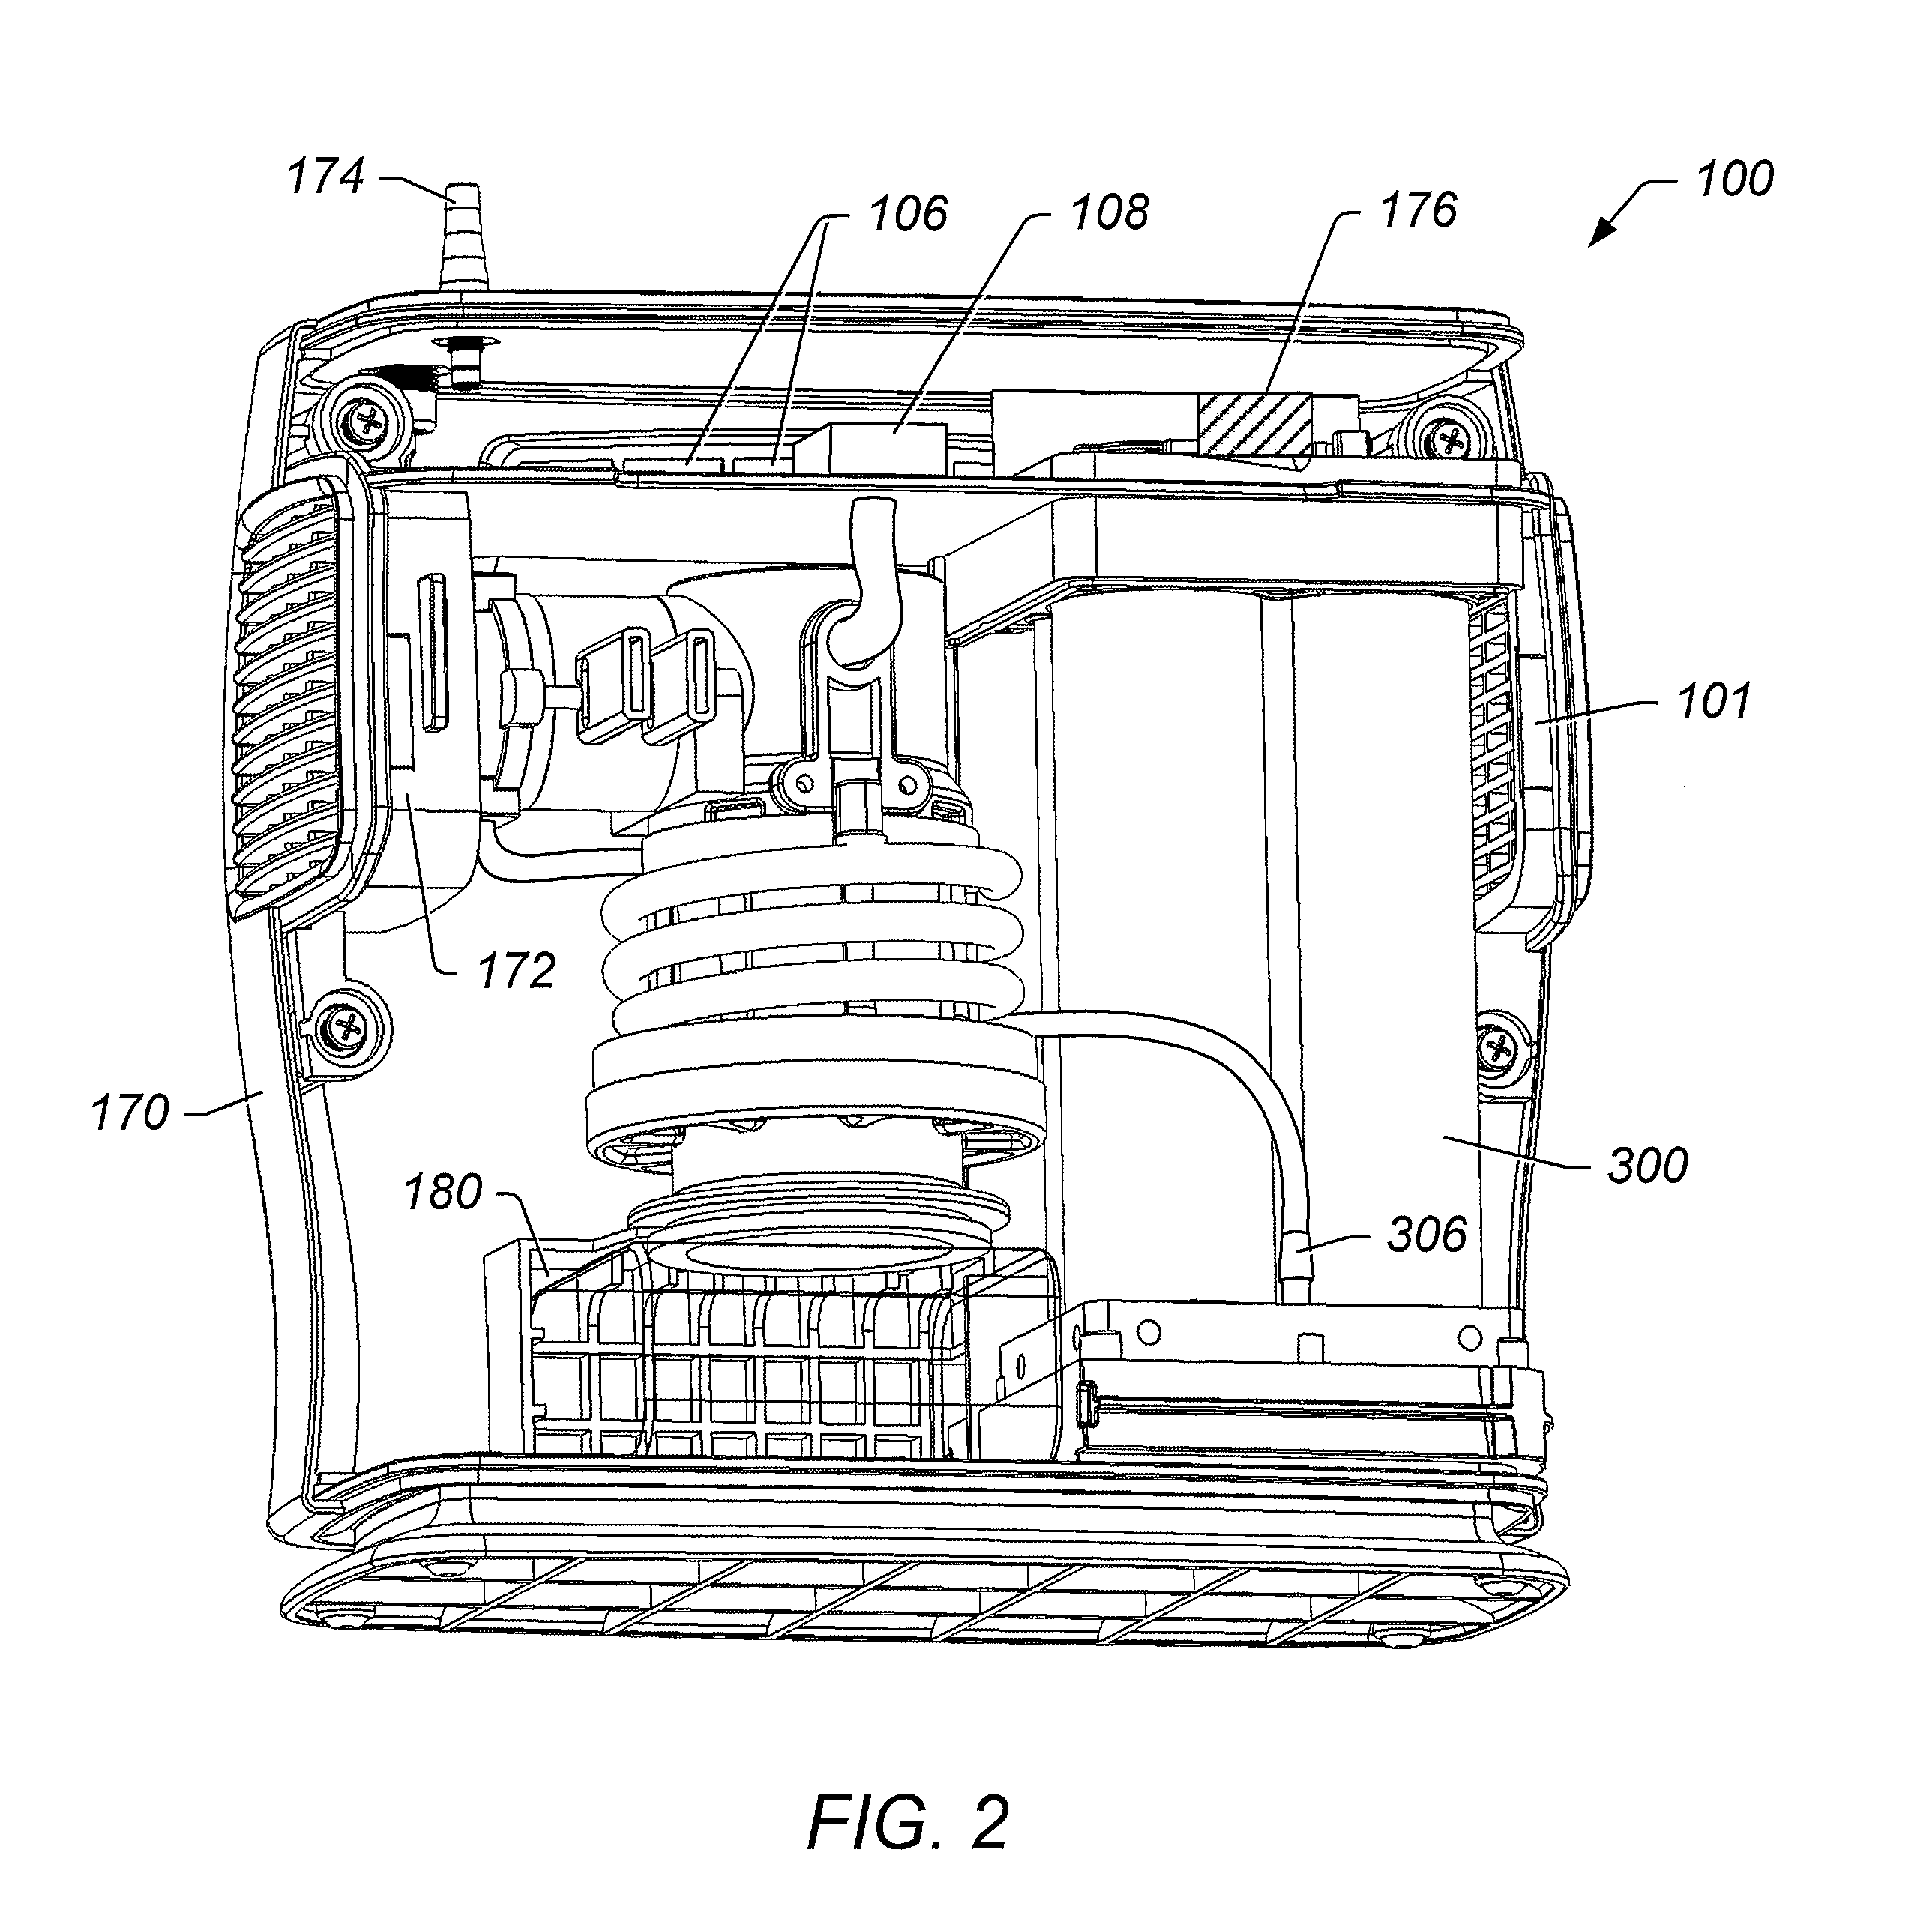 Shutdown system and method for an oxygen concentrator